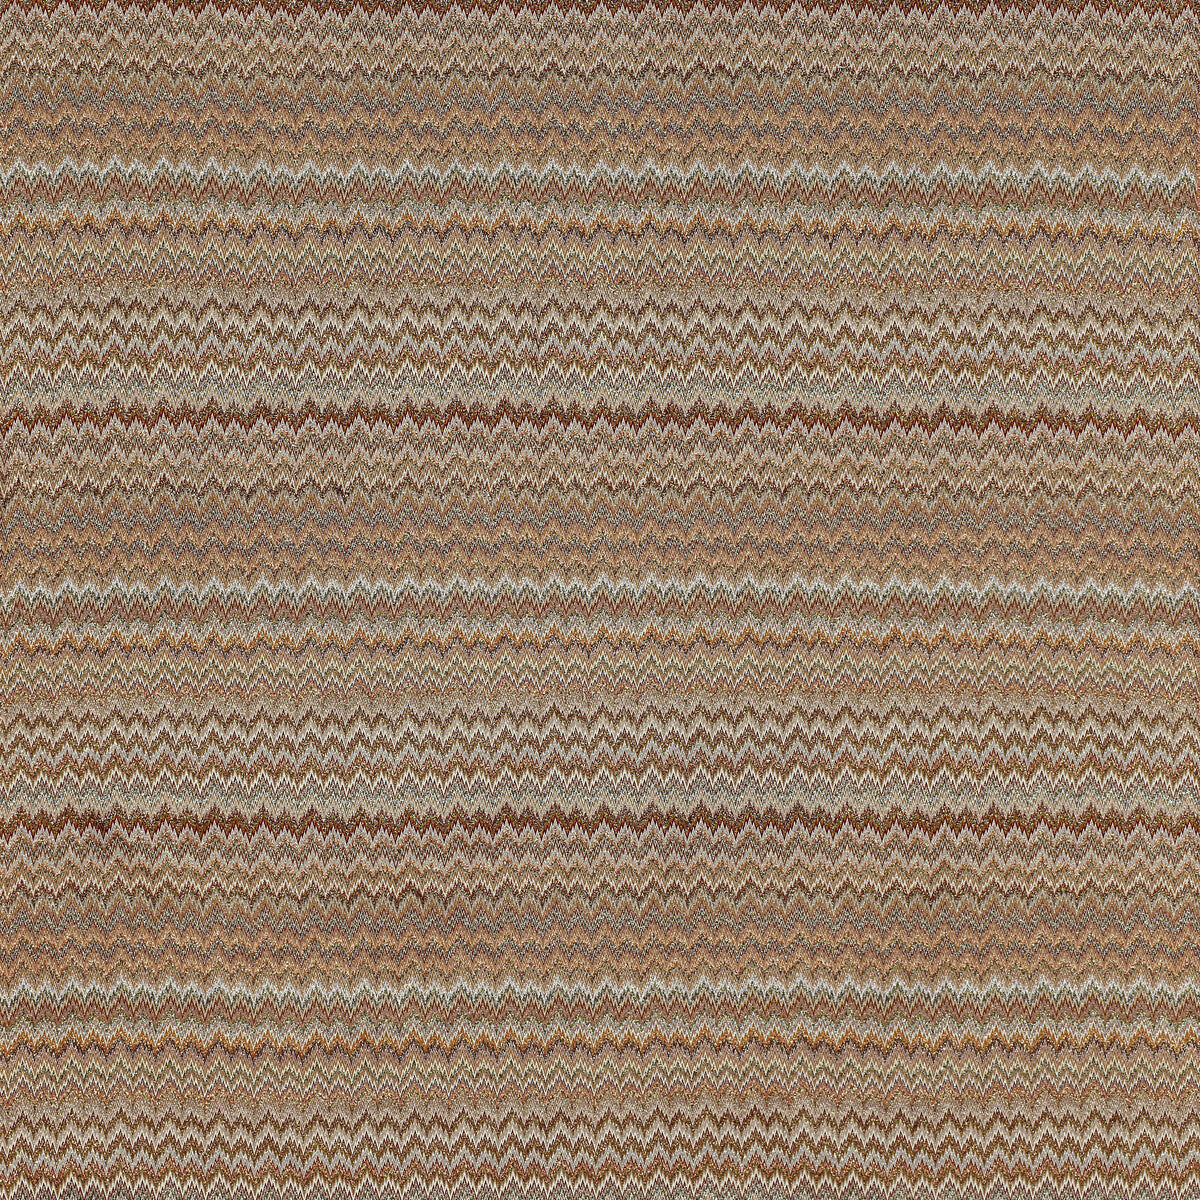 Plaisir fabric in 156 color - pattern 36184.624.0 - by Kravet Couture in the Missoni Home collection